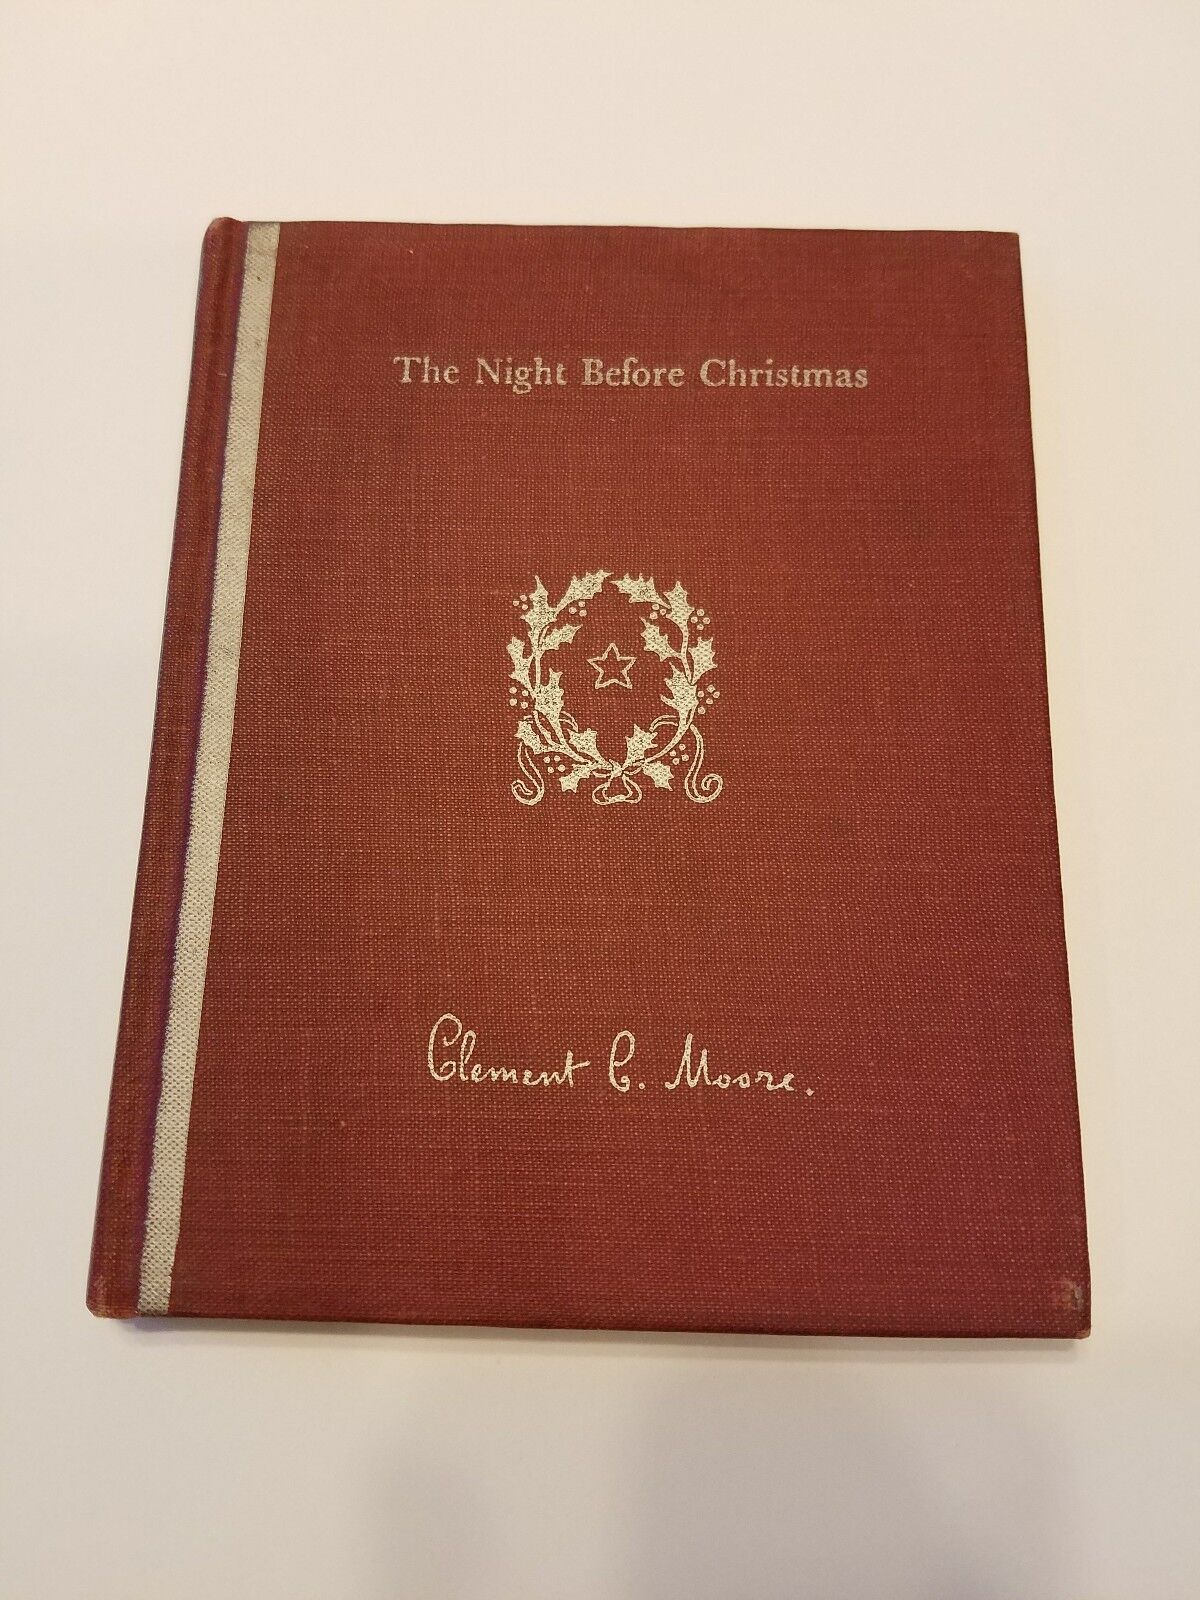 THE NIGHT BEFORE CHRISTMAS Life of the Author Clement C. Moore1933 ArthurHosking